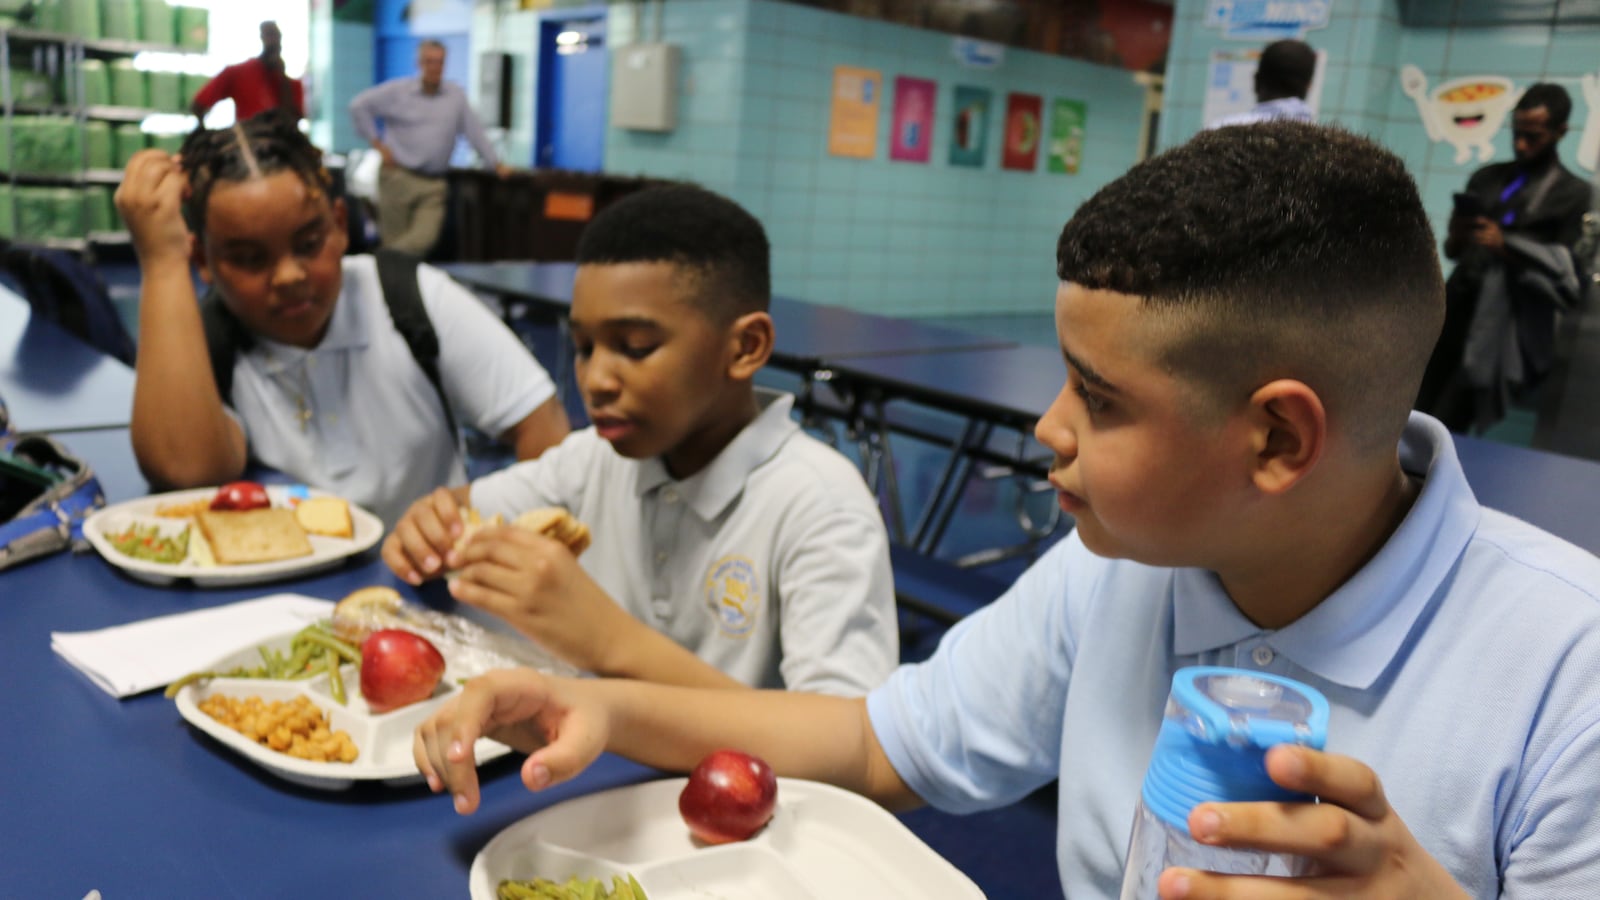 Students at P.S./I.S. 180 in Harlem have lunch on the first day of the 2018-2019 school year.